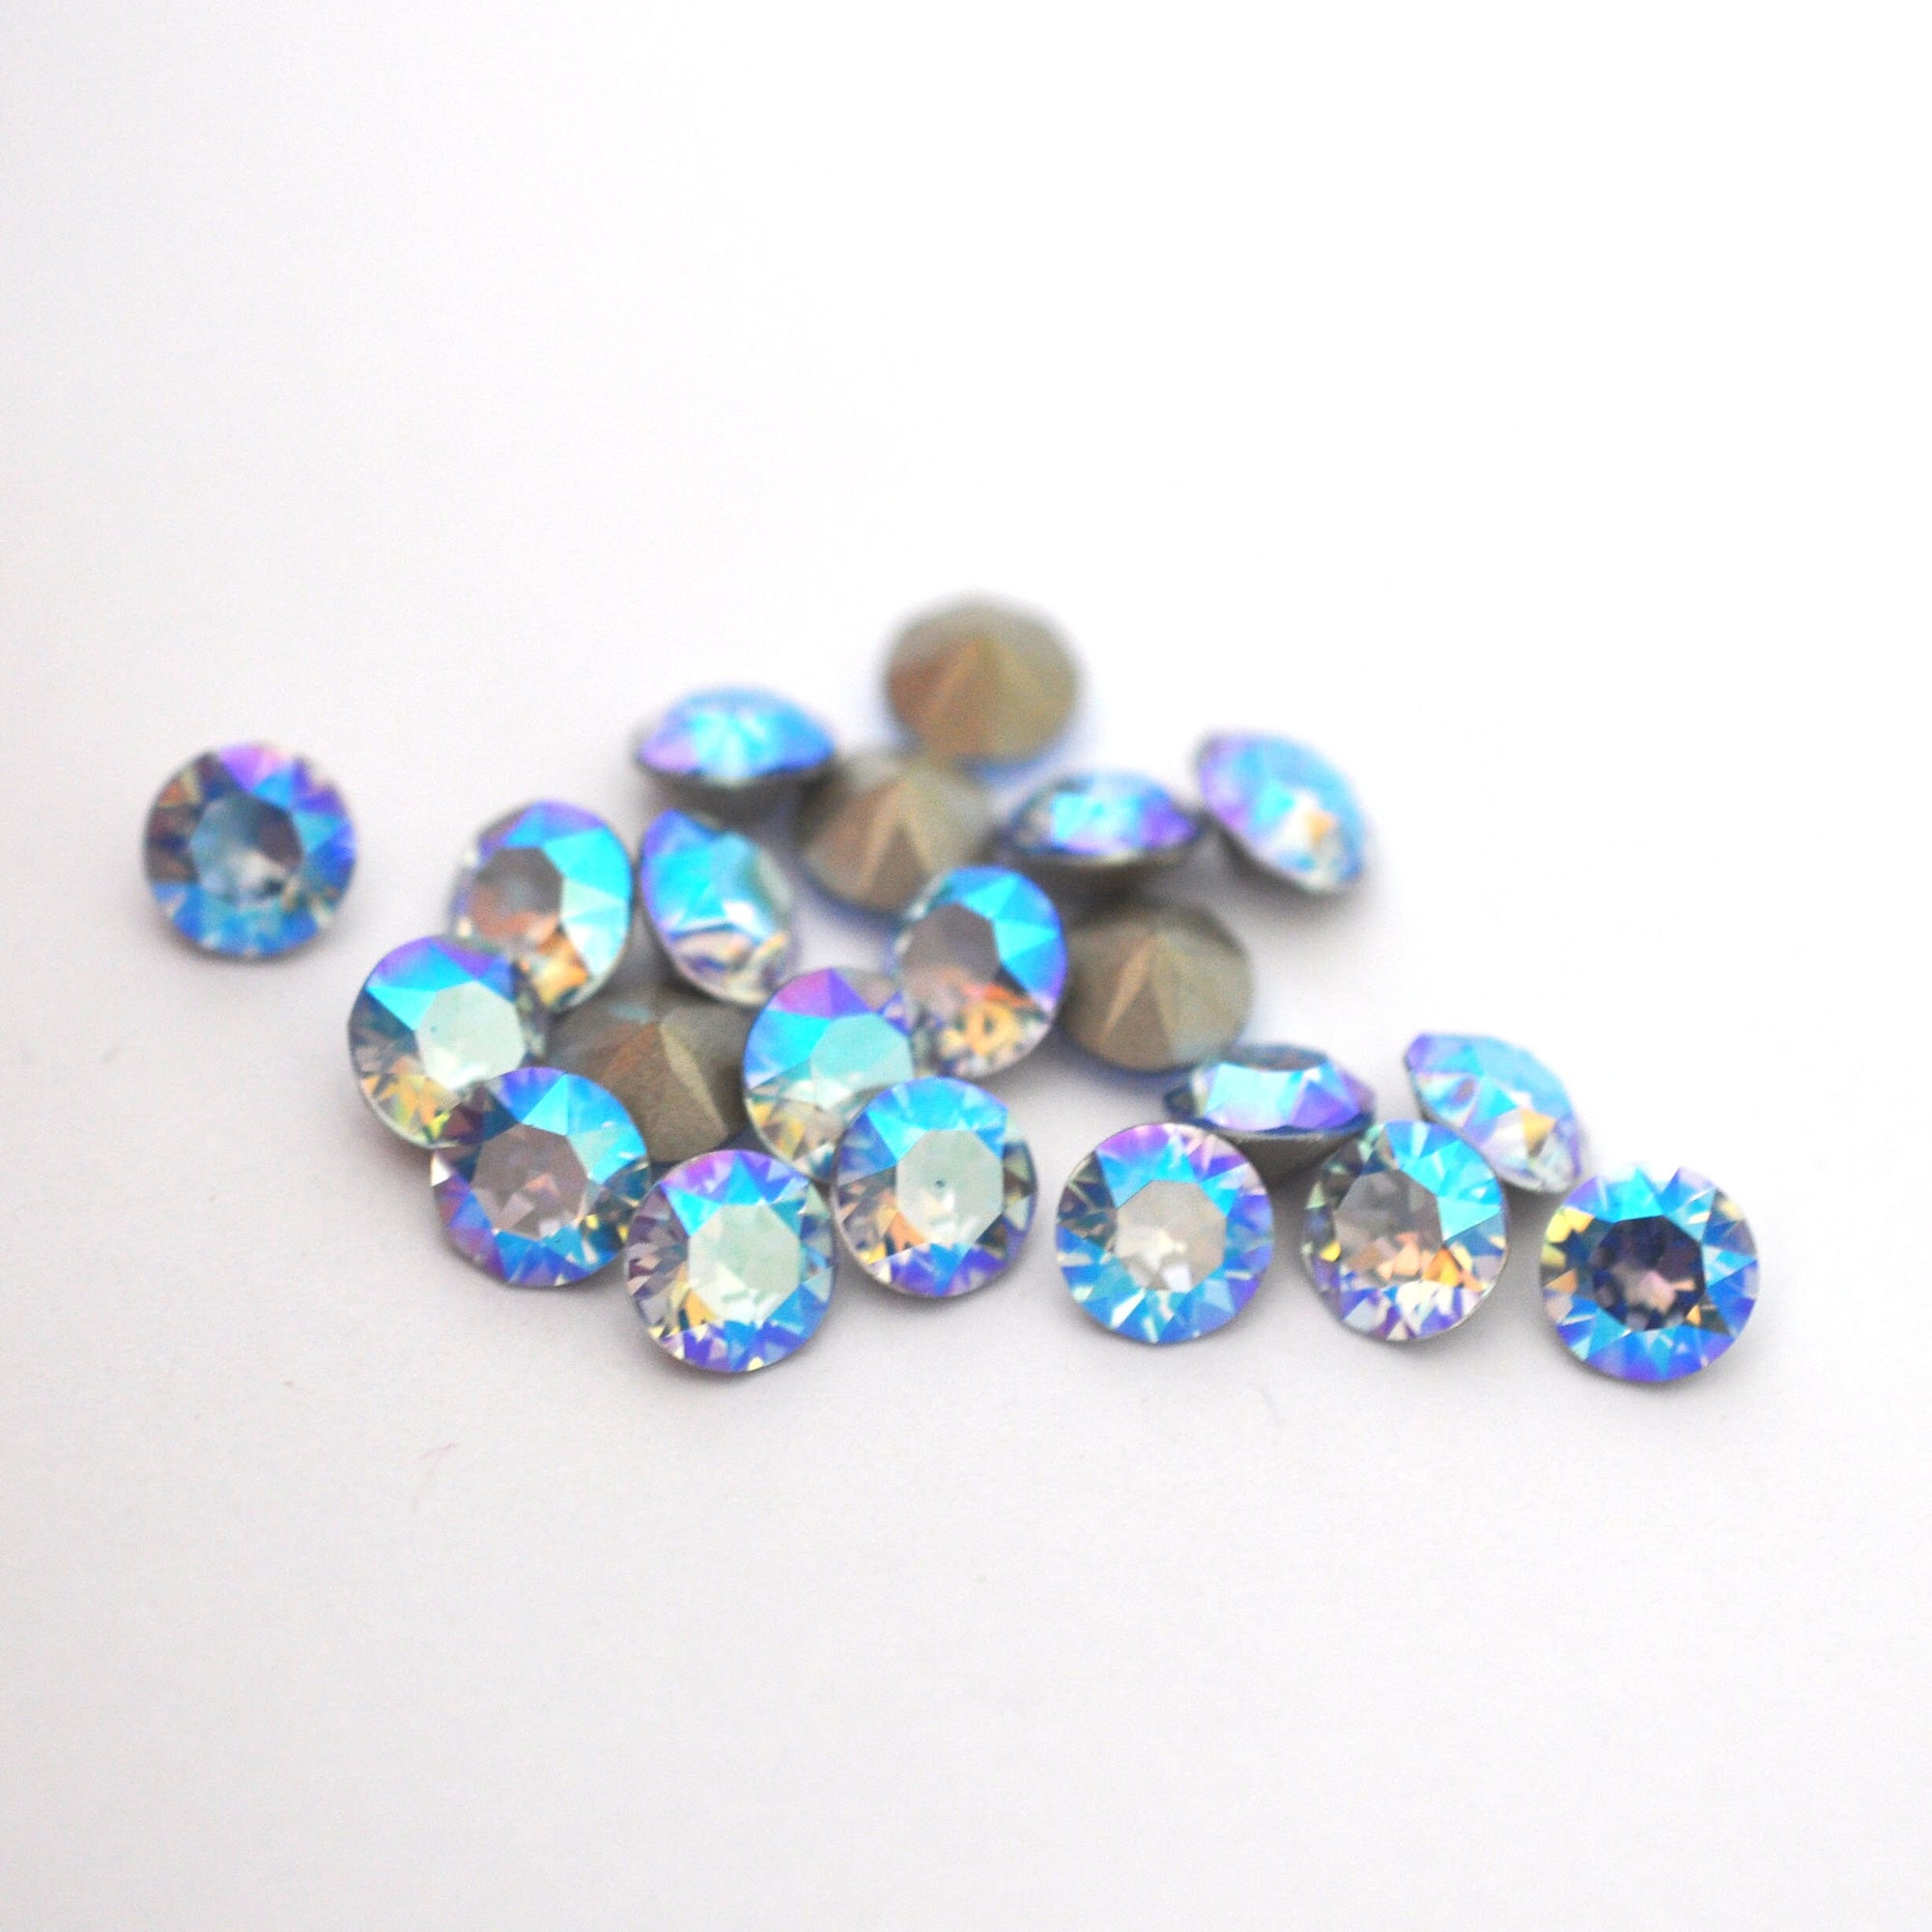 Light Sapphire Shimmer 1088 Pointed Back Chaton Barton Crystal 29ss, 6mm